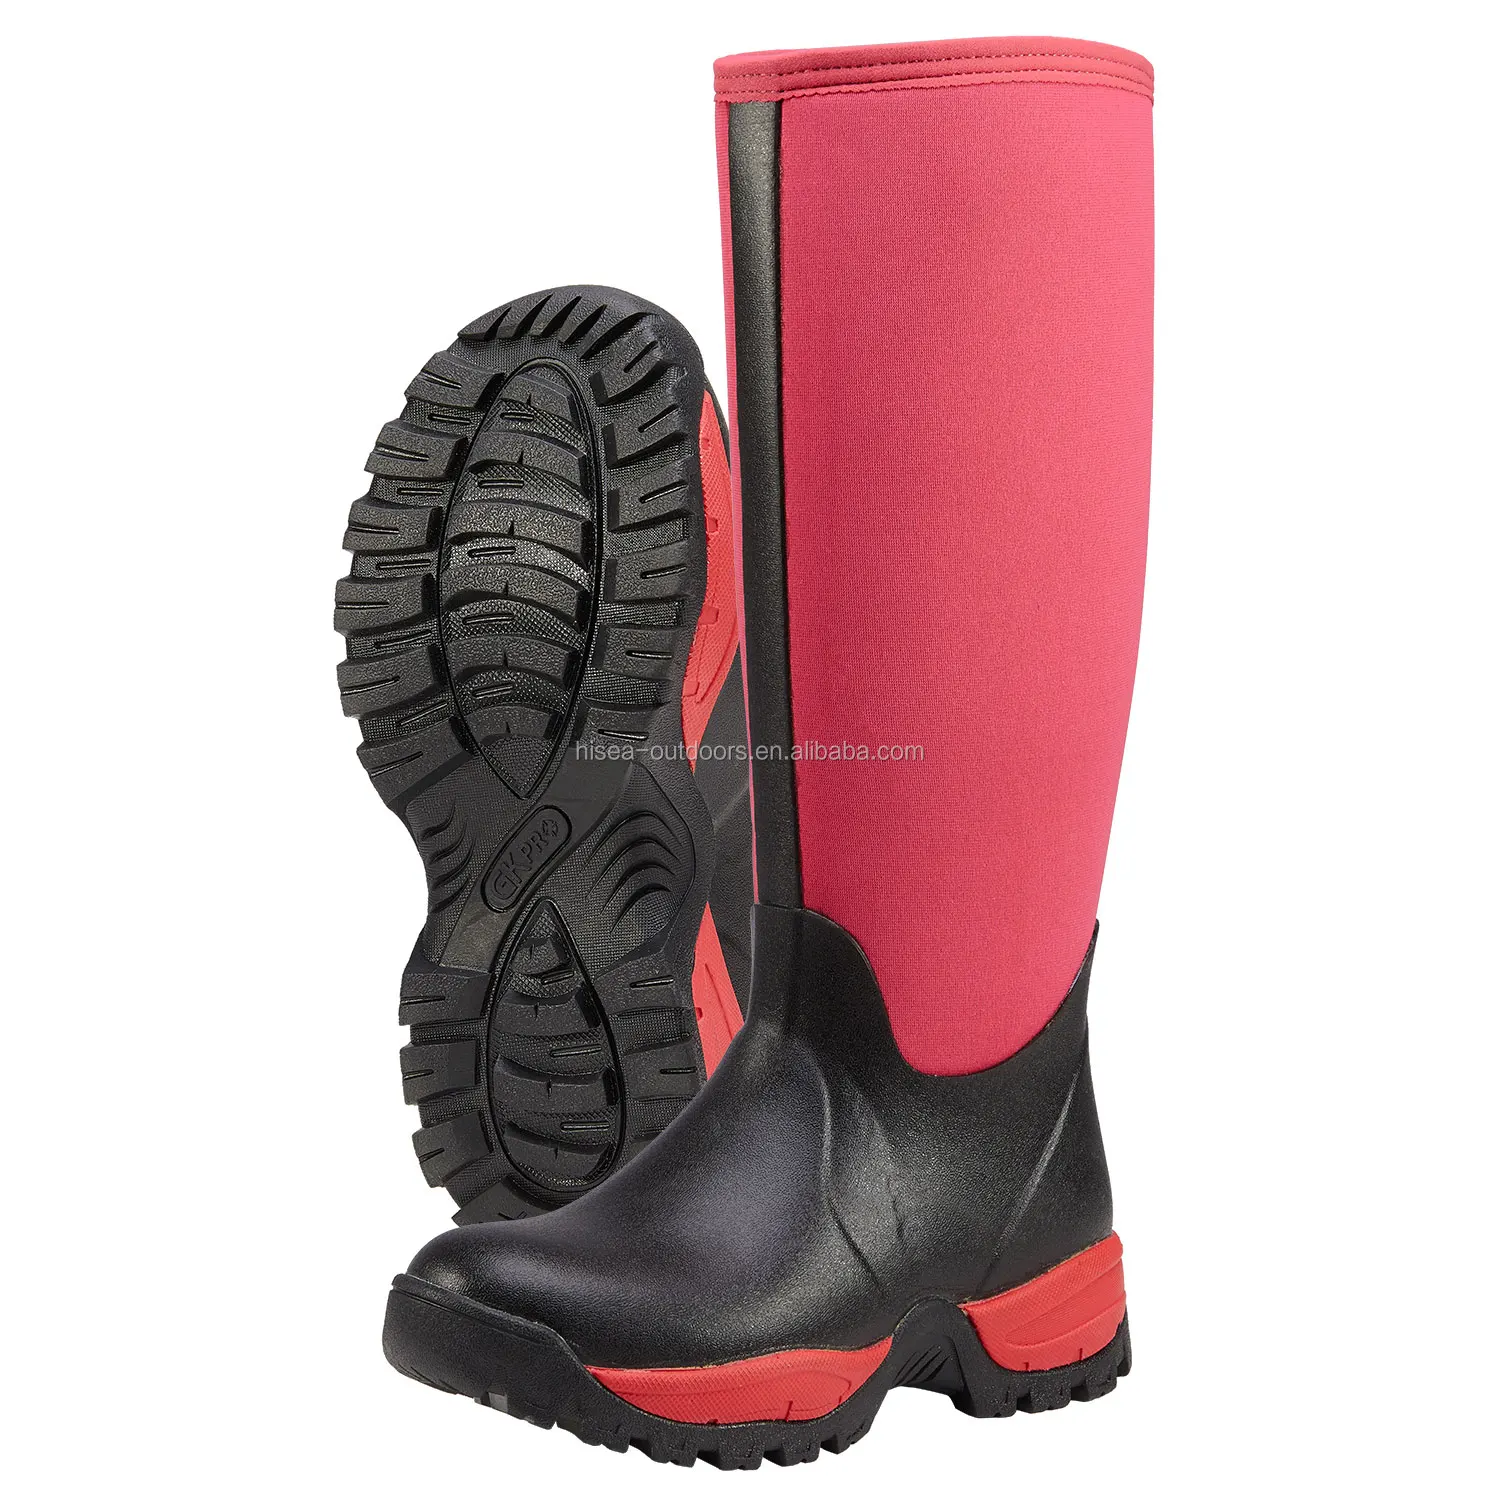 HISEA Women's BREATHABLE Rubber Boots Waterproof Snow & Rain Muck Hunting Boots